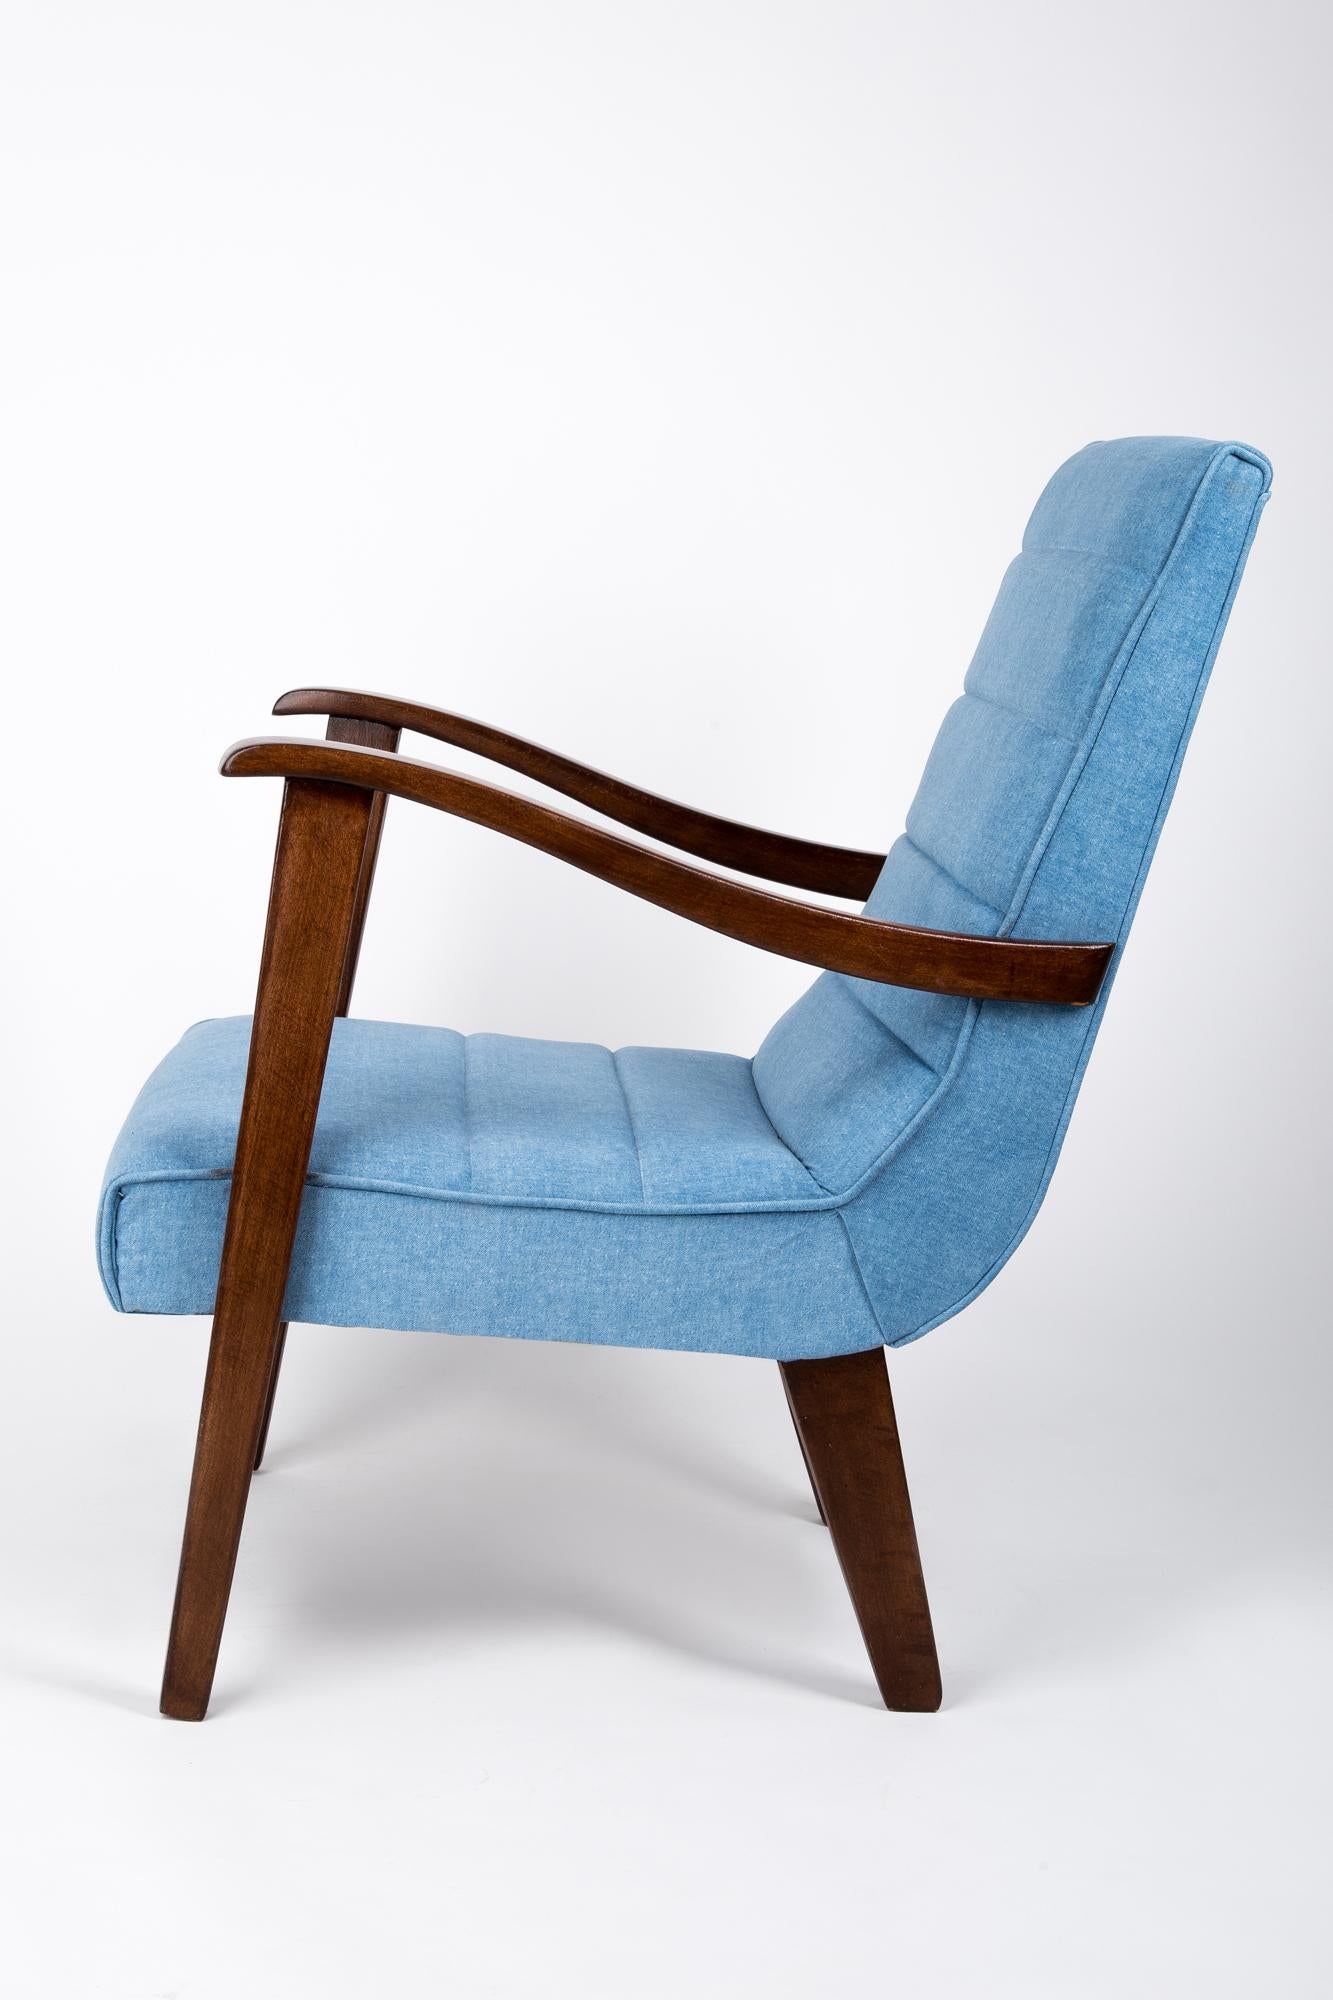 Textile Mid-Century Modern Blue Armchair by Prudnik Furniture Factory, Poland, 1960s For Sale